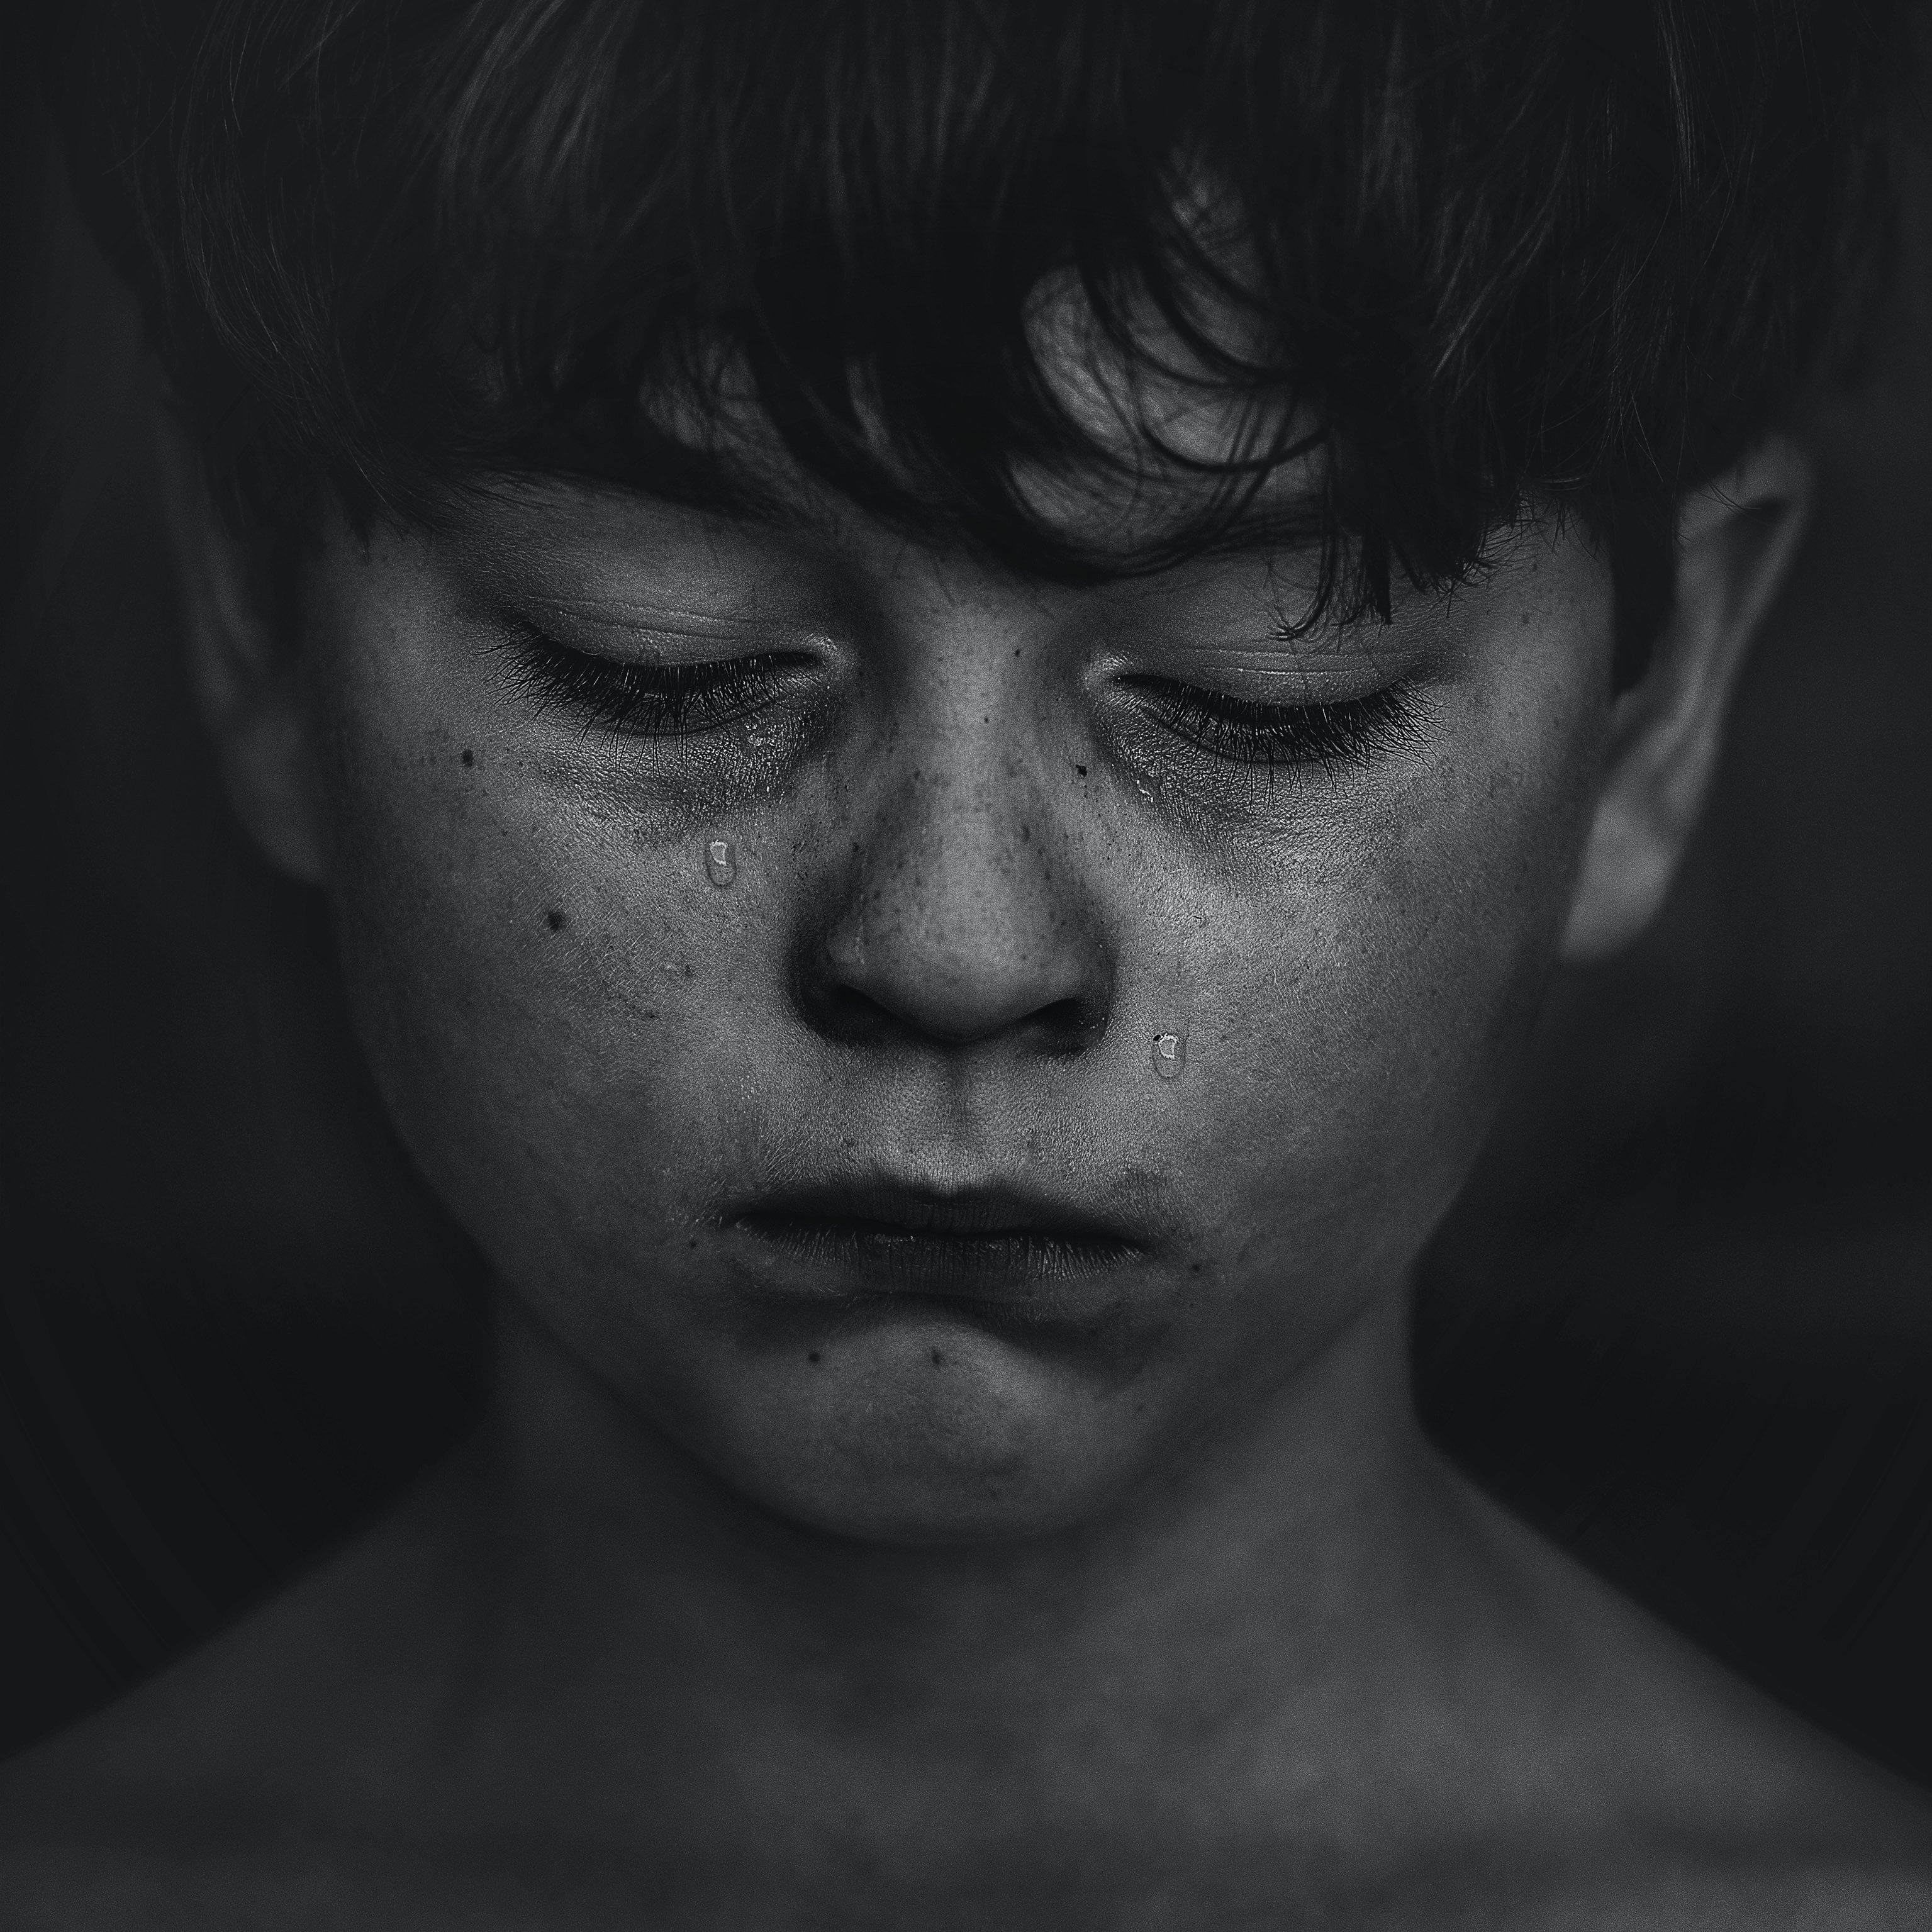 Jared had lost his parents when he was eight years old. | Source: Unsplash